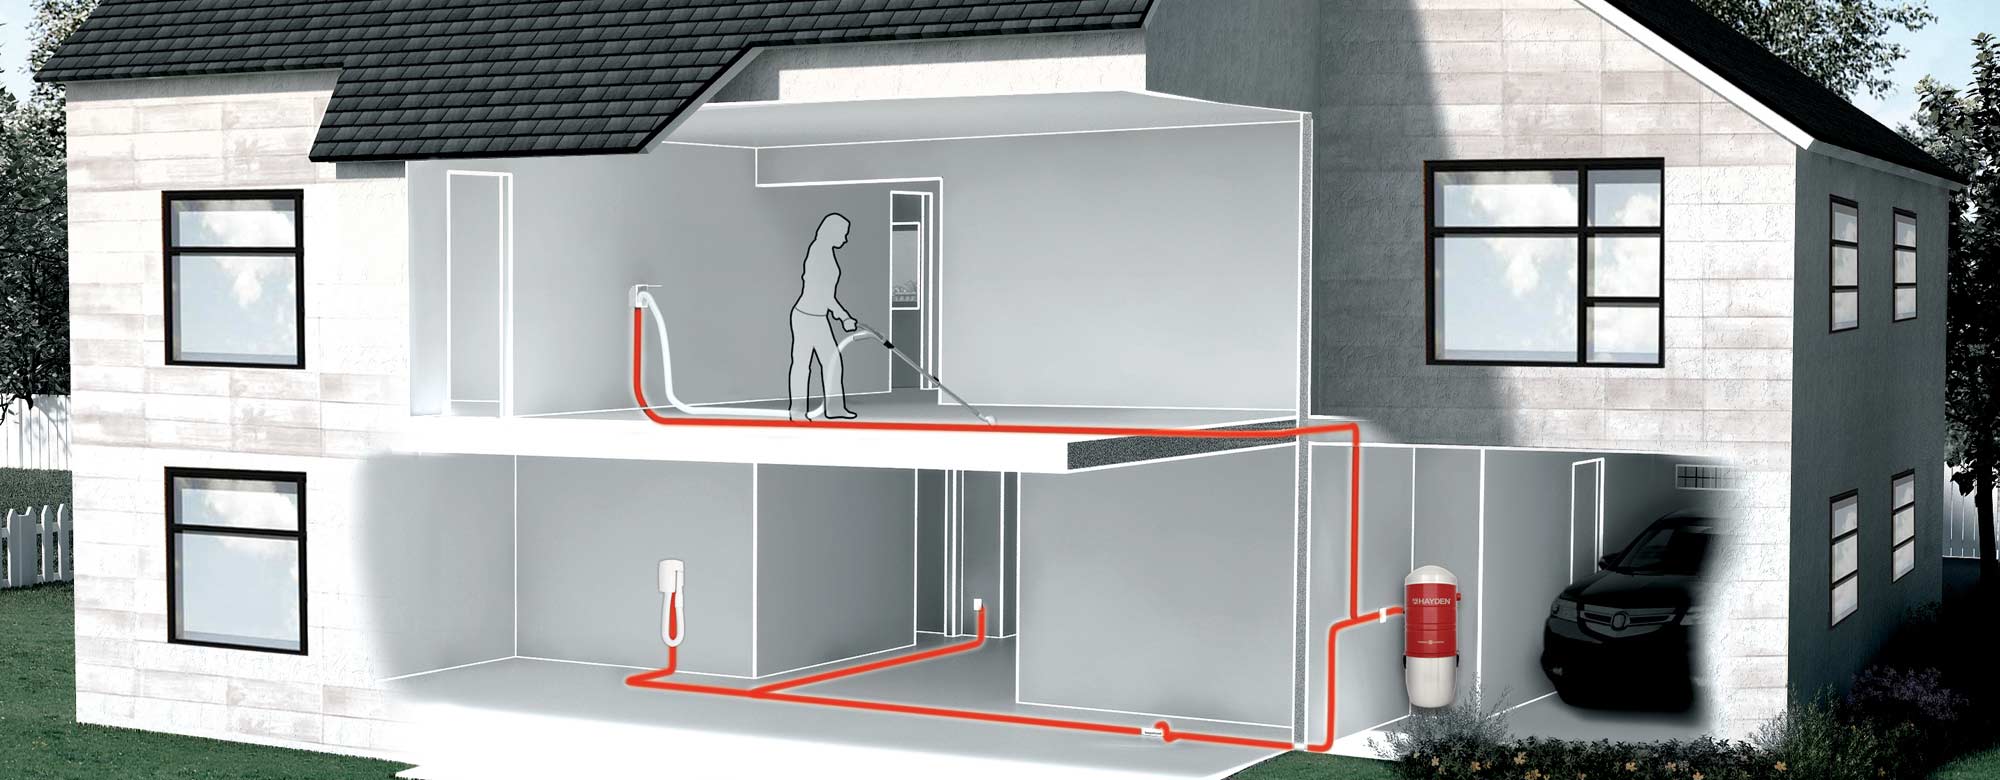 schema of the network of a central vacuum system installation in a house